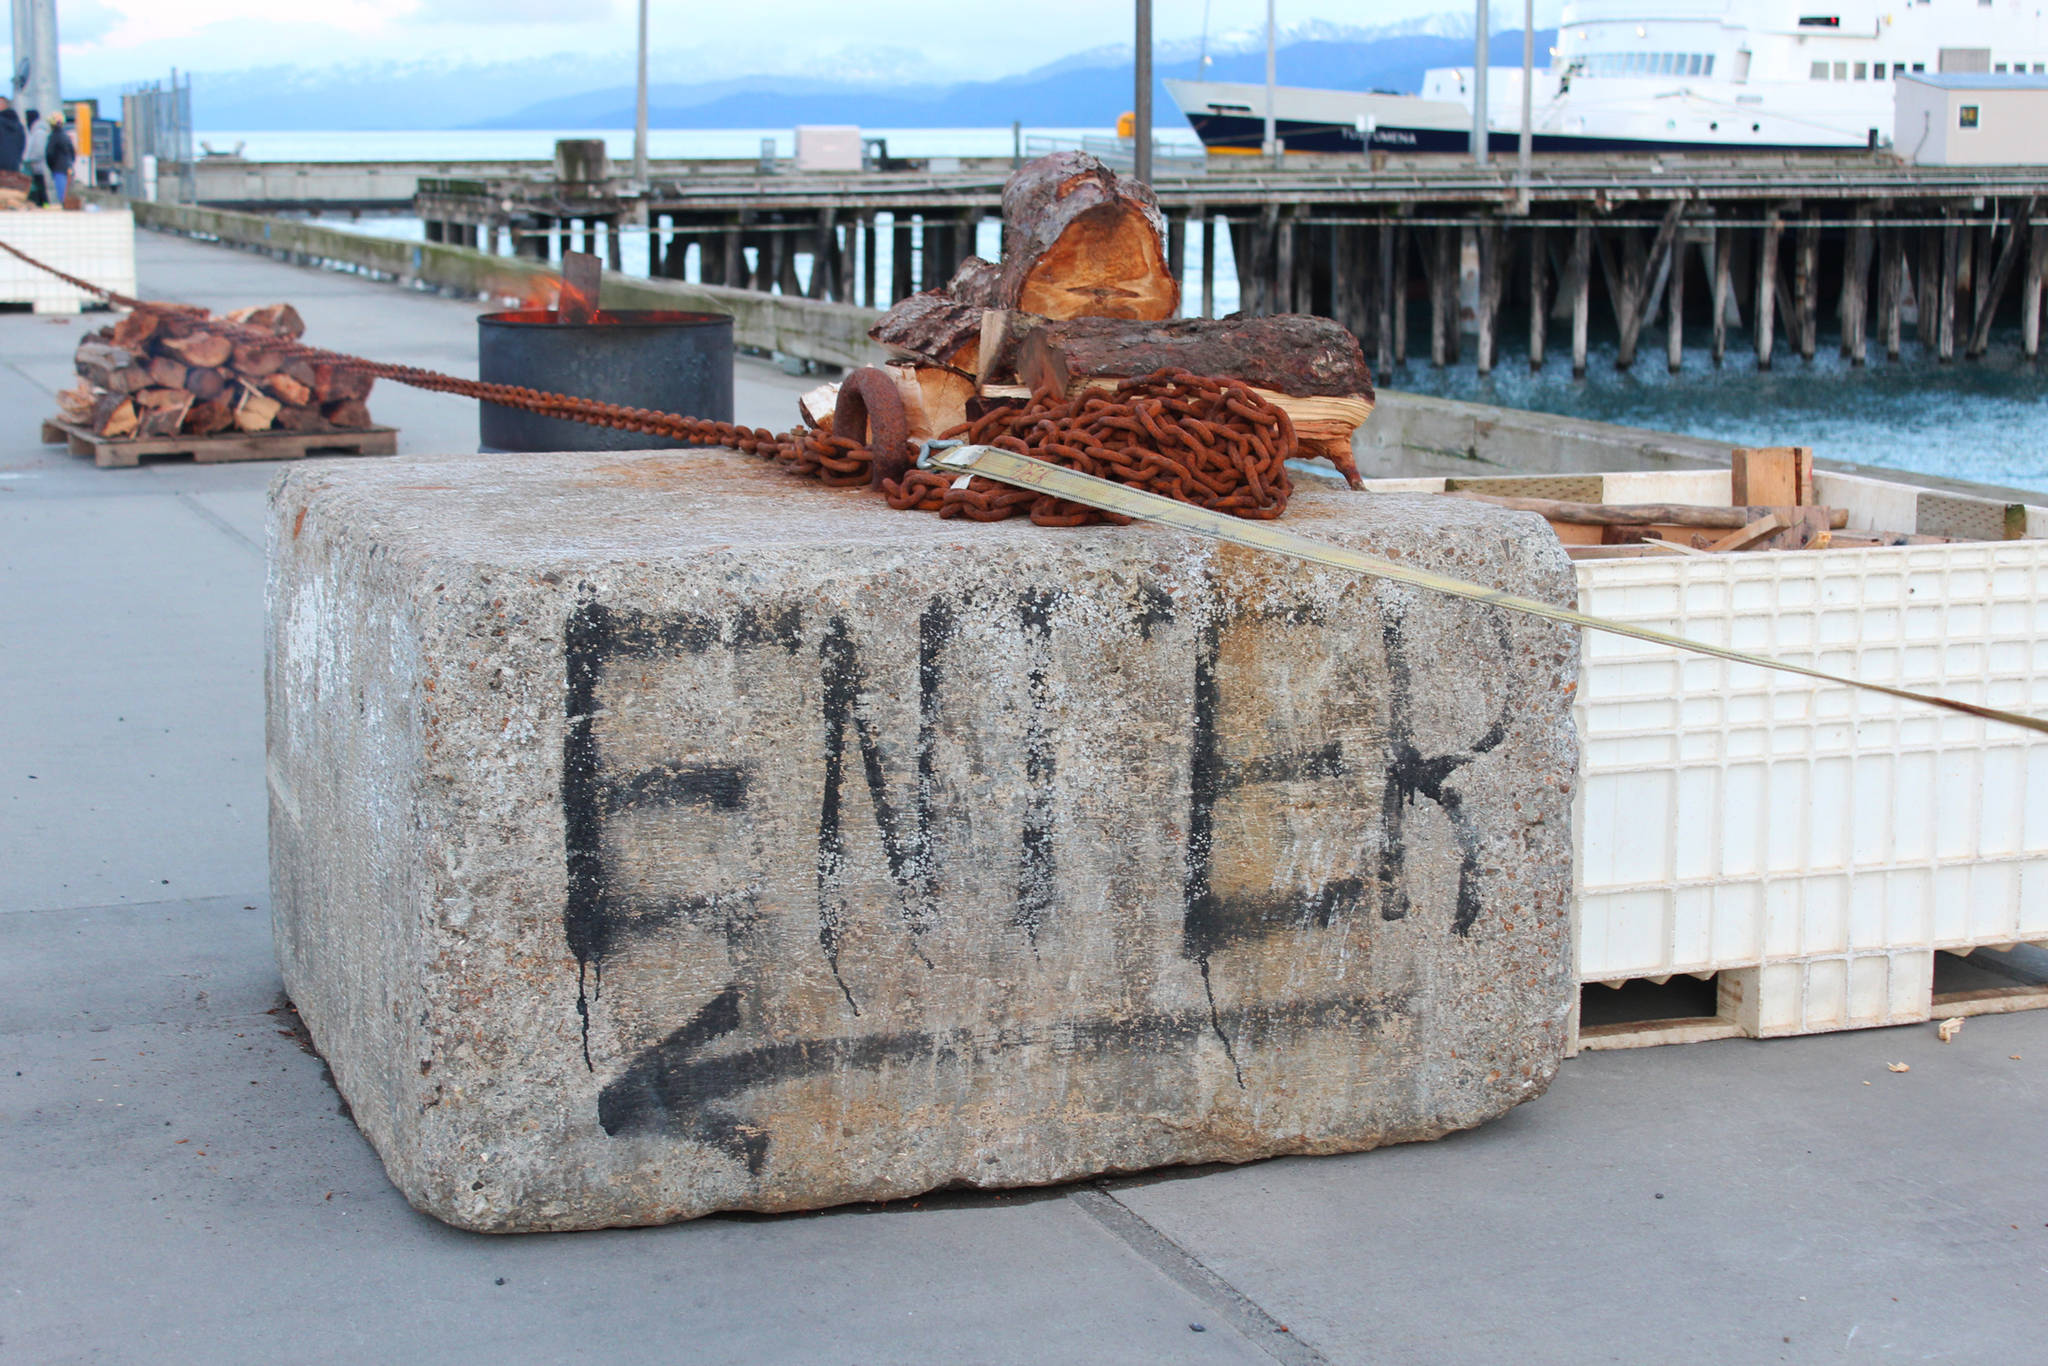 A concrete block points the way for attendees of this year’s Haunted Hickory event aboard the U.S. Coast Guard Cutter Hickory on Thursday, Oct. 26, 2017 in Homer, Alaska. Hundreds of people lined up and waited to be scared by the ship’s crew in the annual spooky tour. (Photo by Megan Pacer/Homer News)